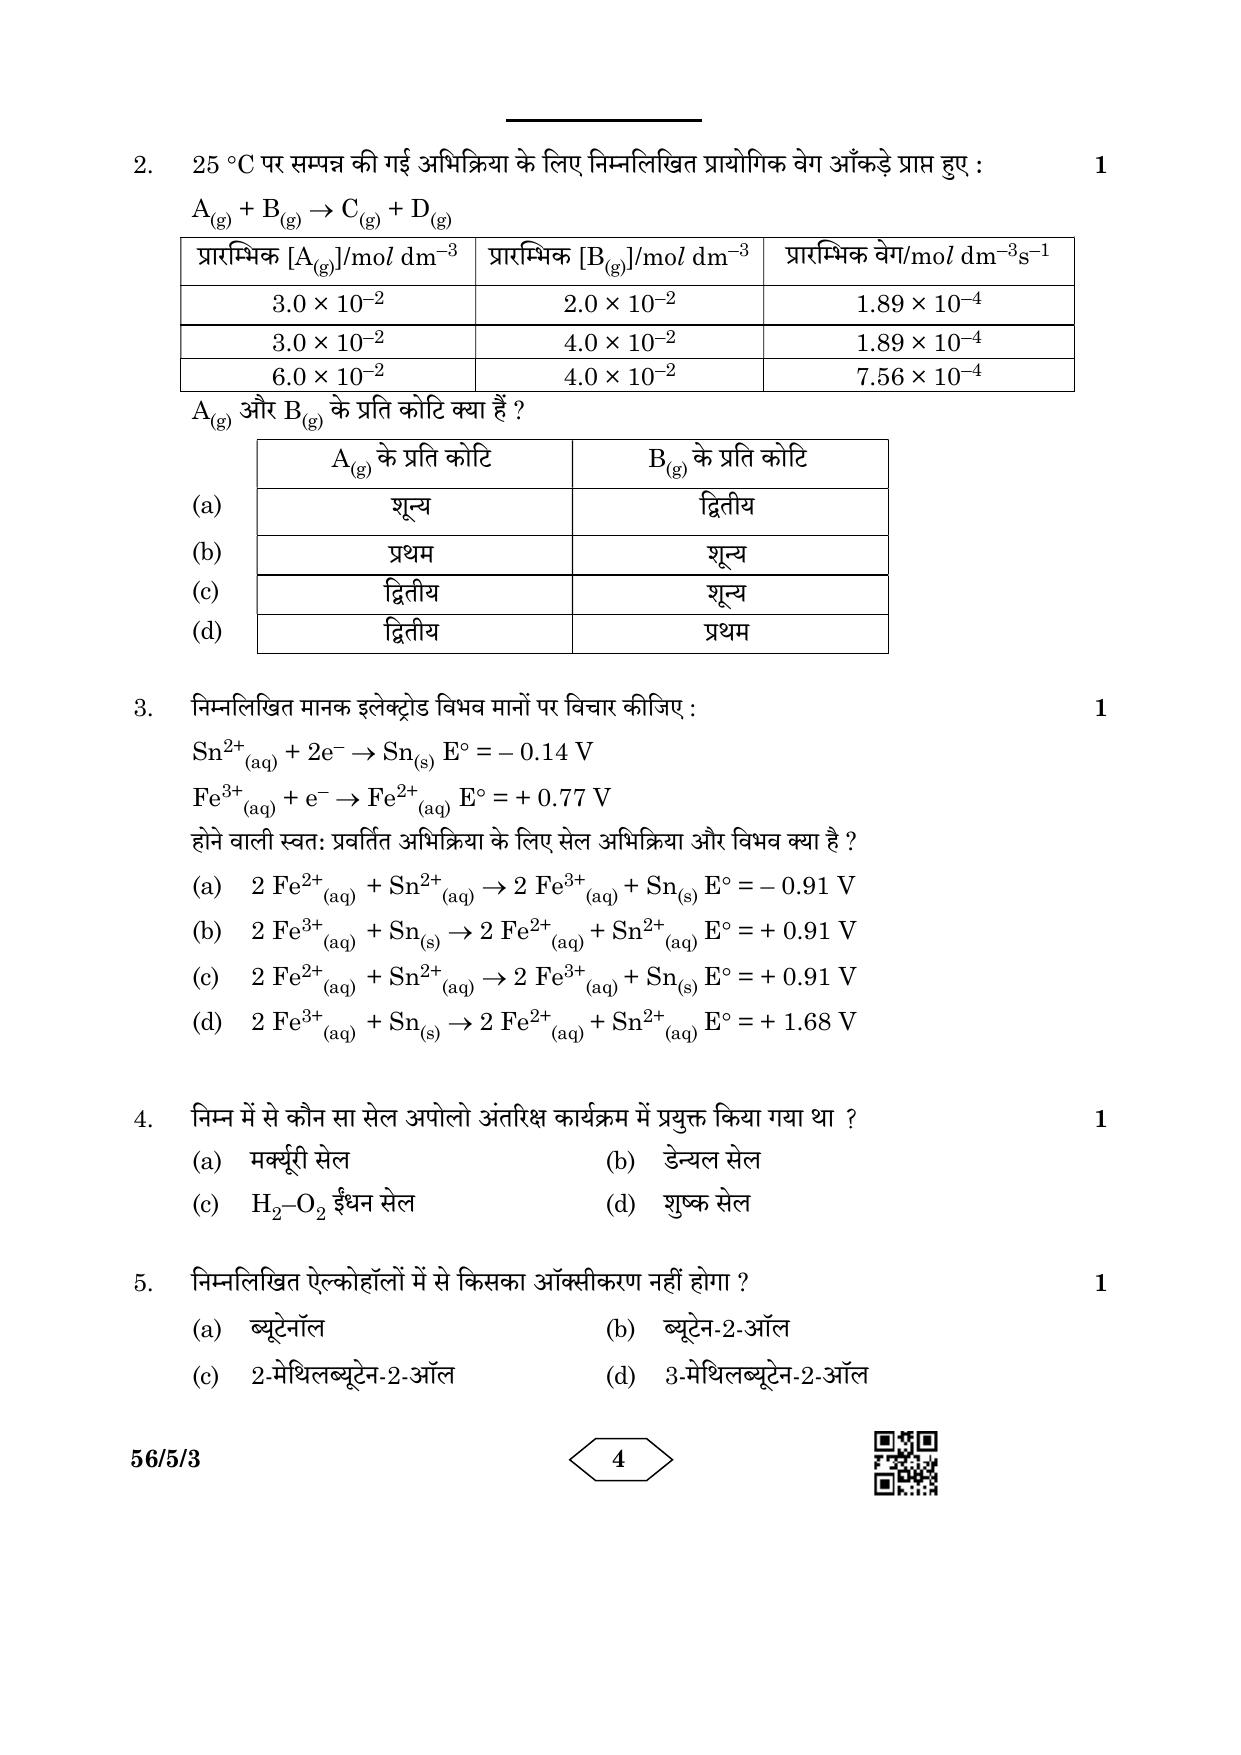 CBSE Class 12 56-5-3 Chemistry 2023 Question Paper - Page 4